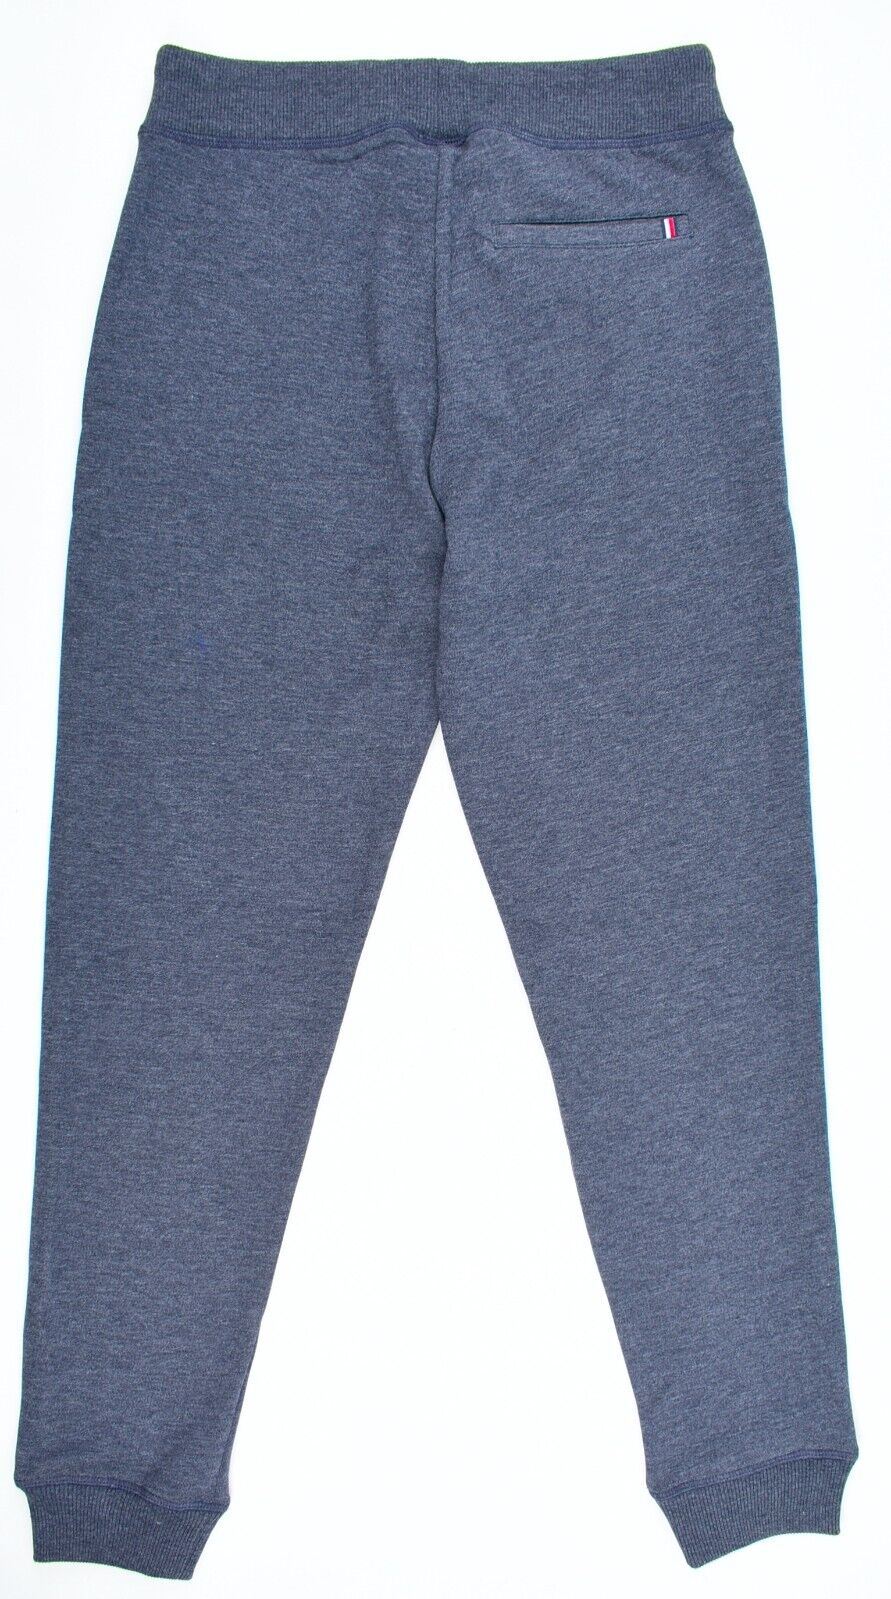 TOMMY HILFIGER Boys' Essential Sweatpants /Joggers, Navy Blue, size 14 years